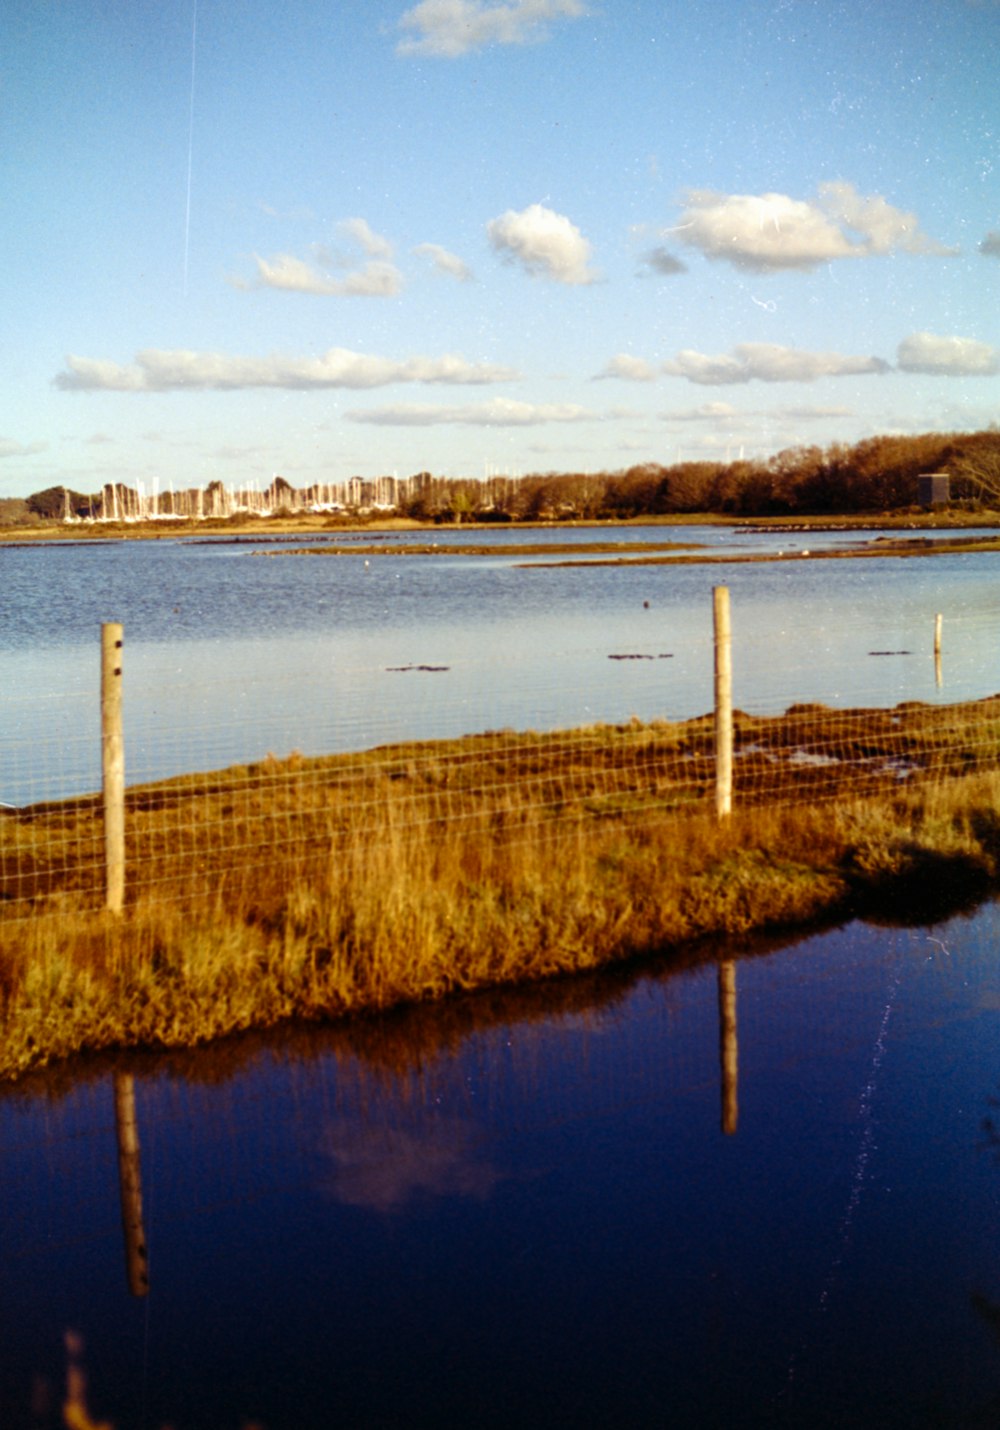 a body of water with a fence in the foreground